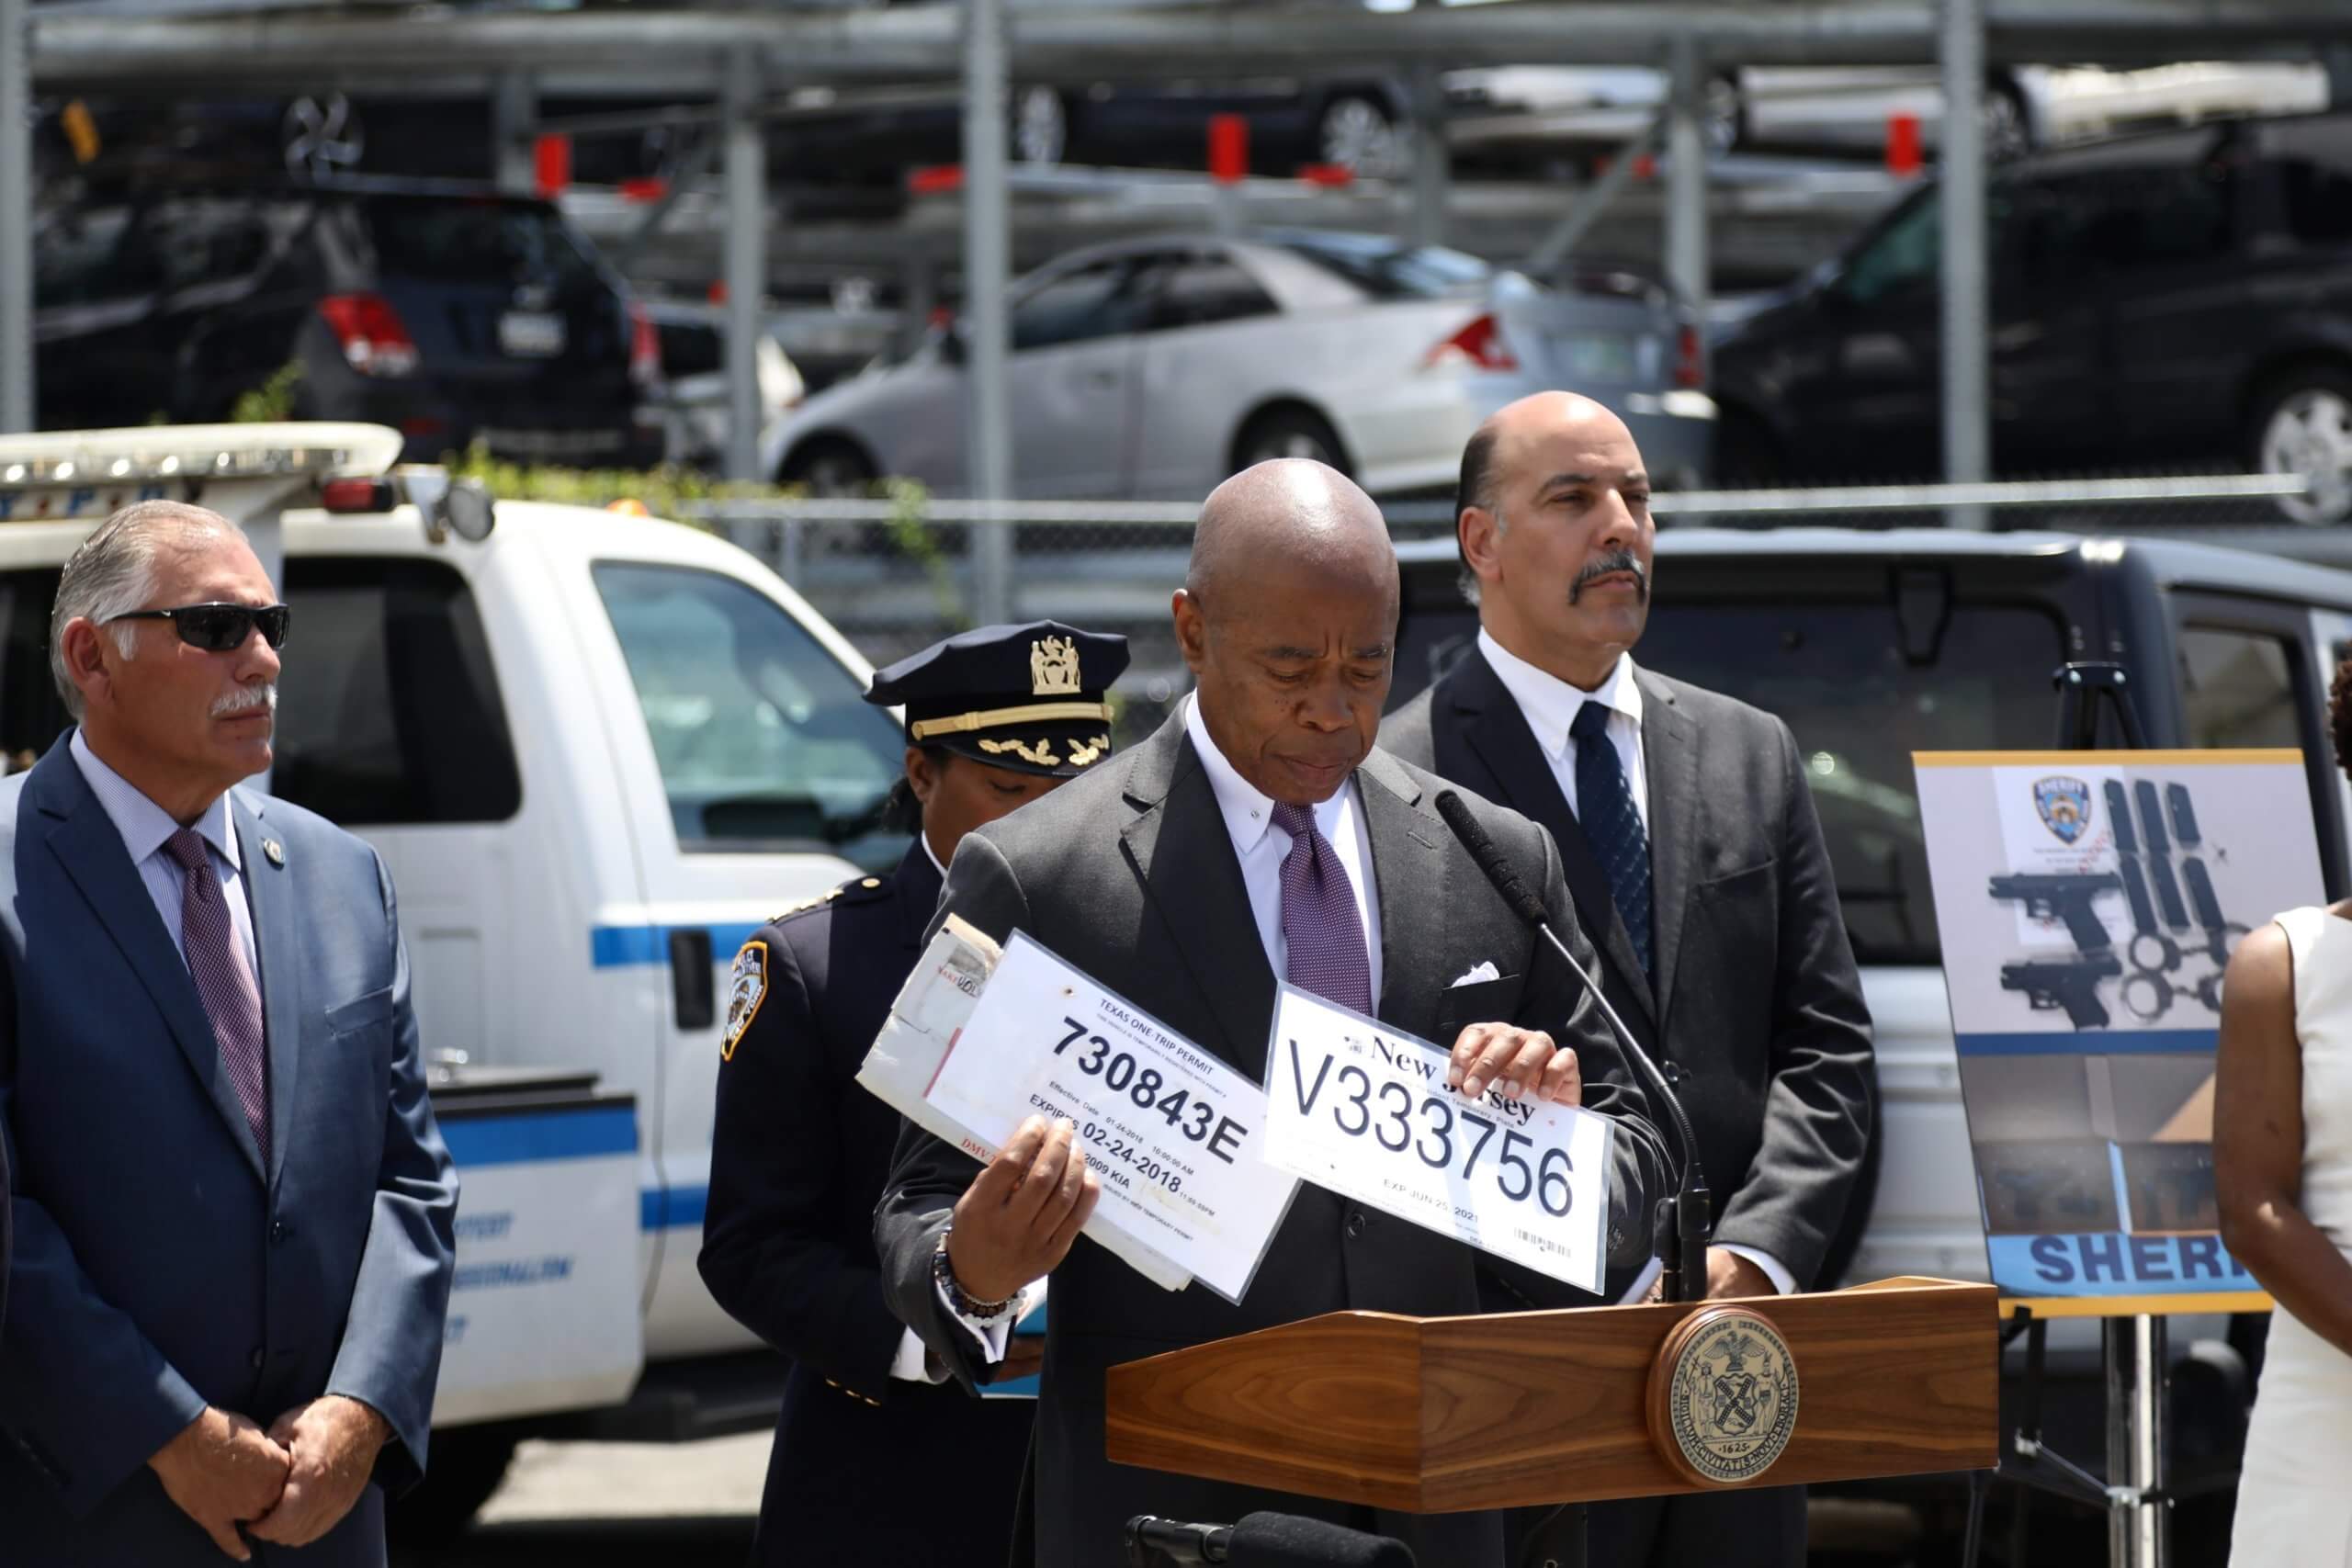 NYC cracks down on license plate covers used to evade tolls, cops